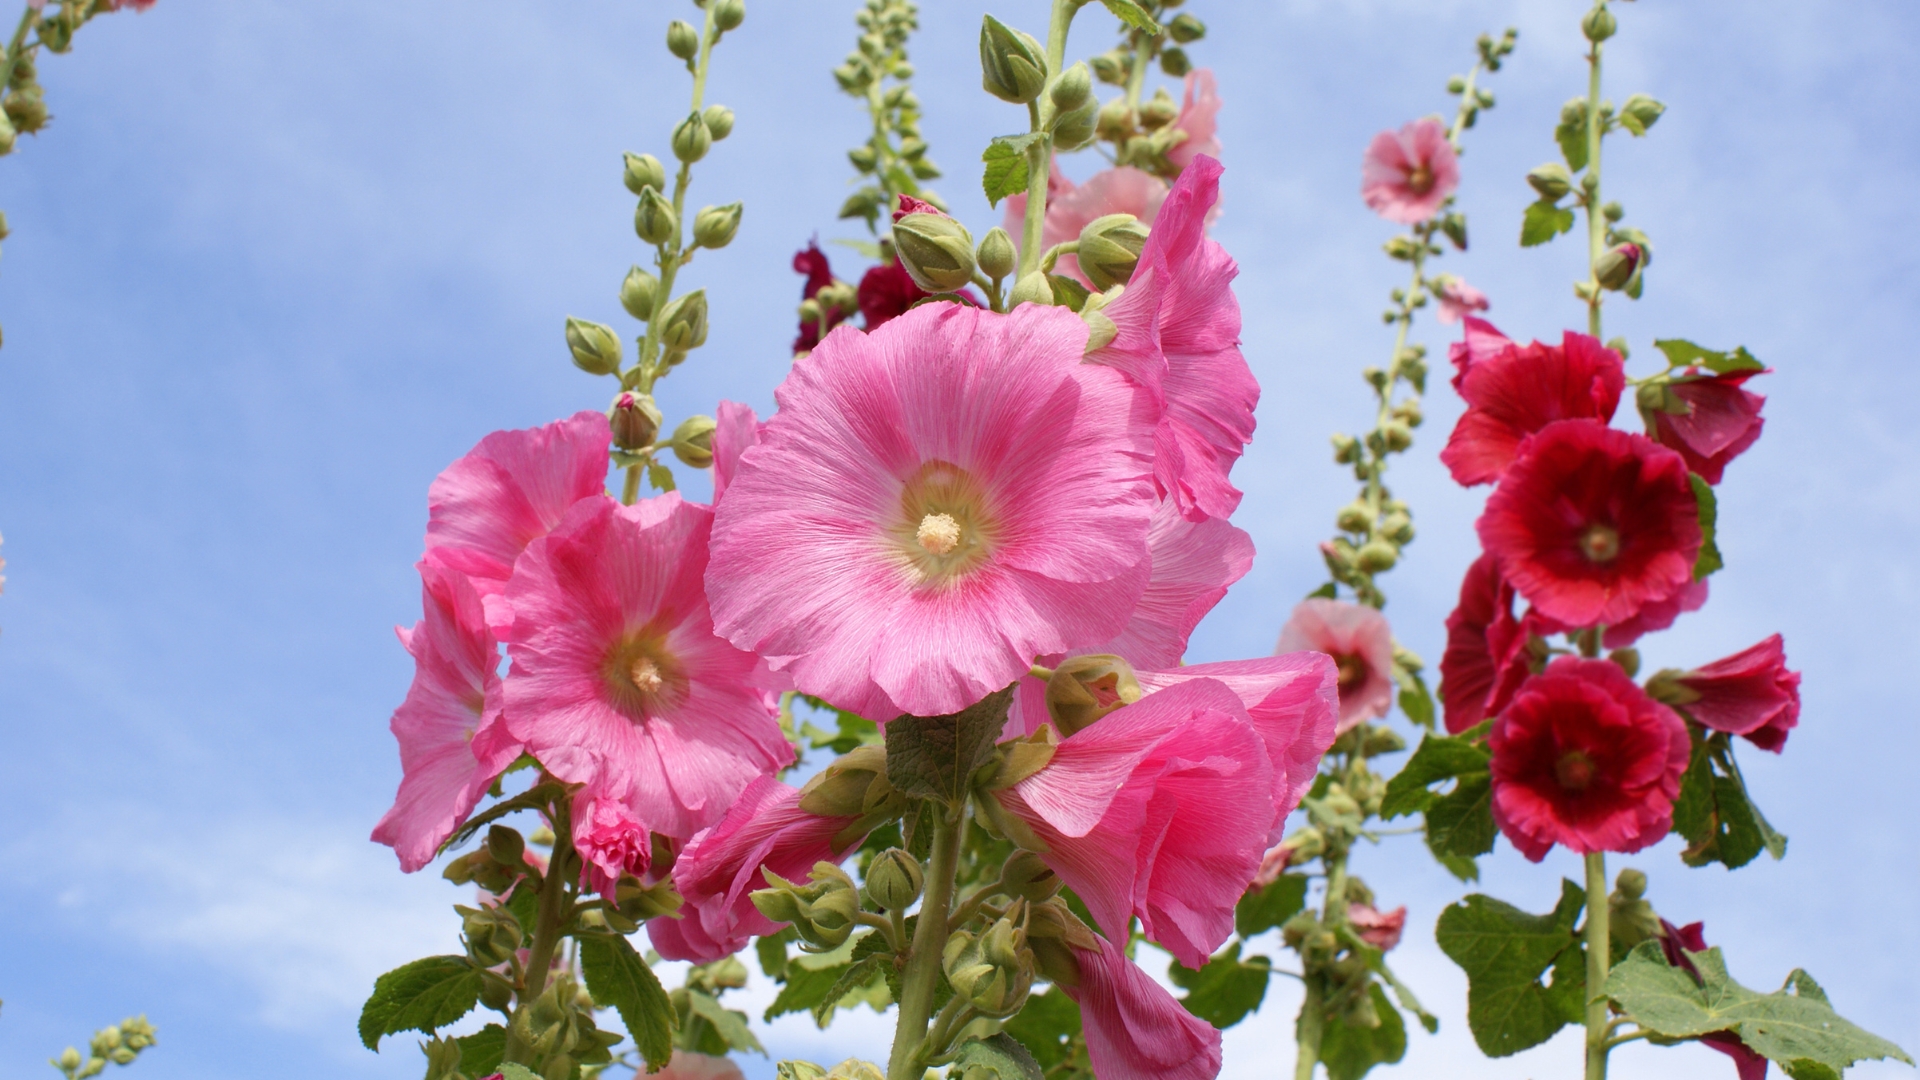 The Ultimate Guide To Planting & Growing Gorgeous Hollyhocks